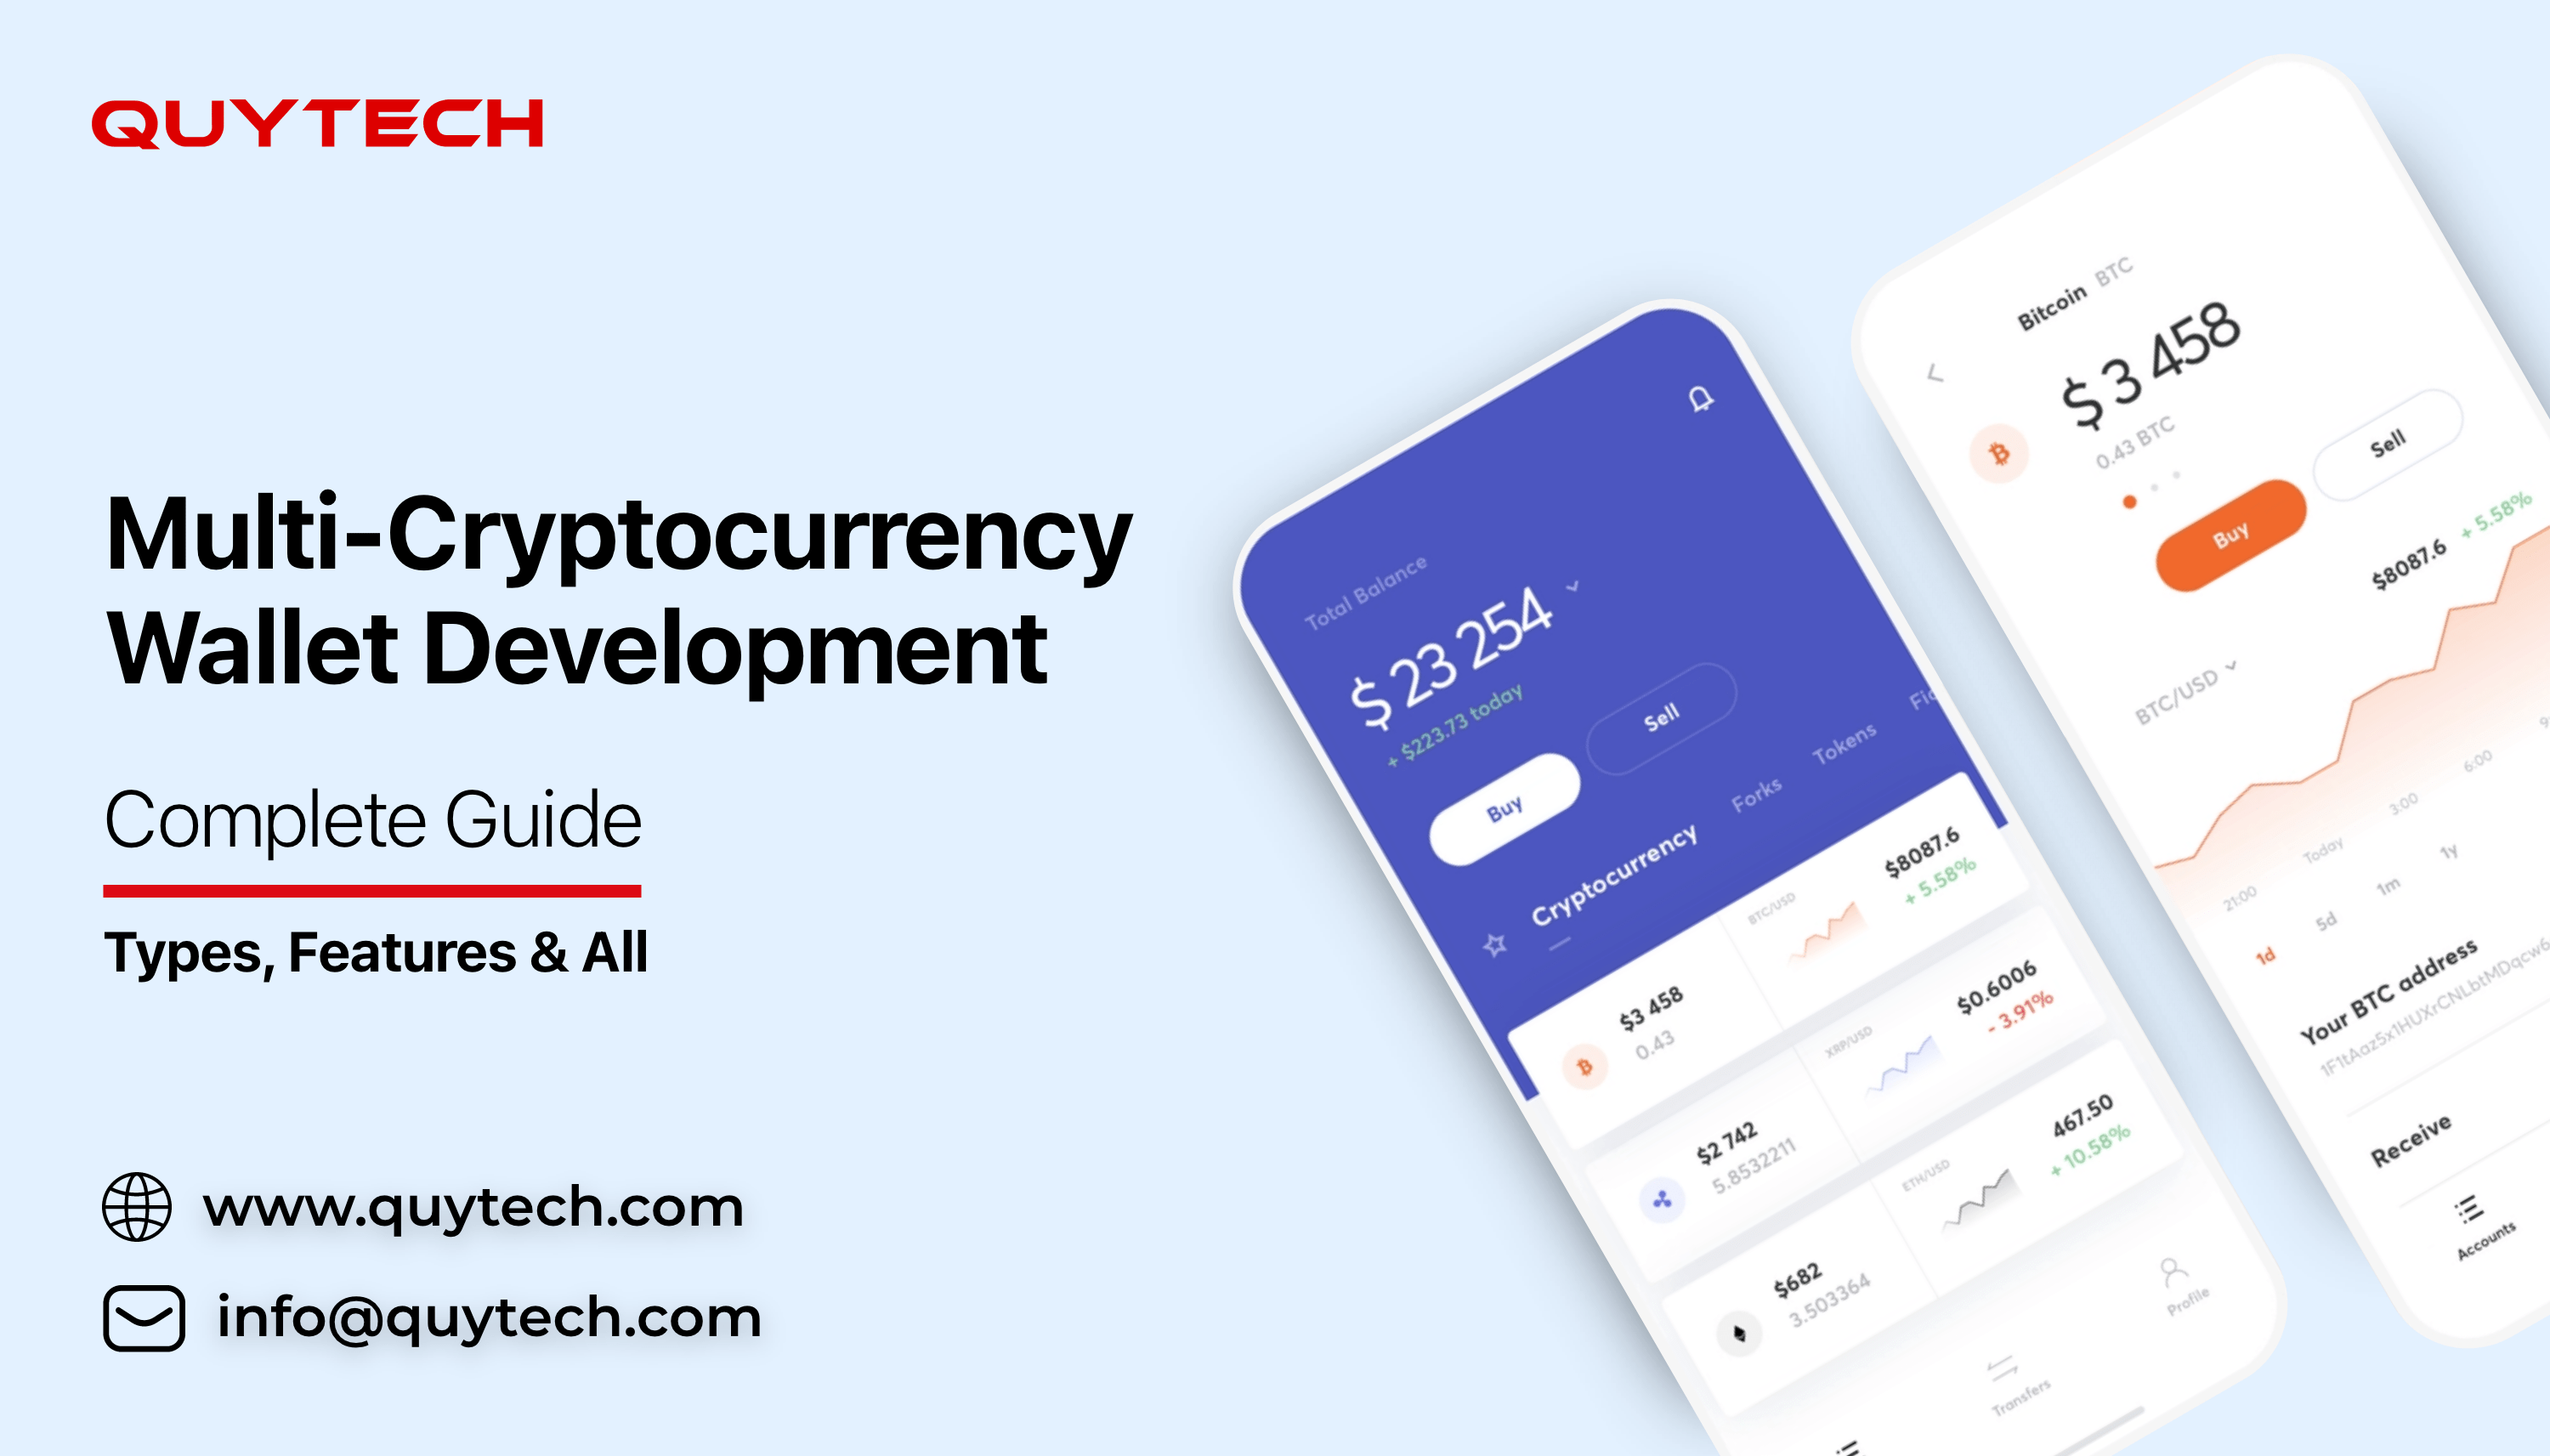 MultiCryptocurrency Wallet Apps Development Guide